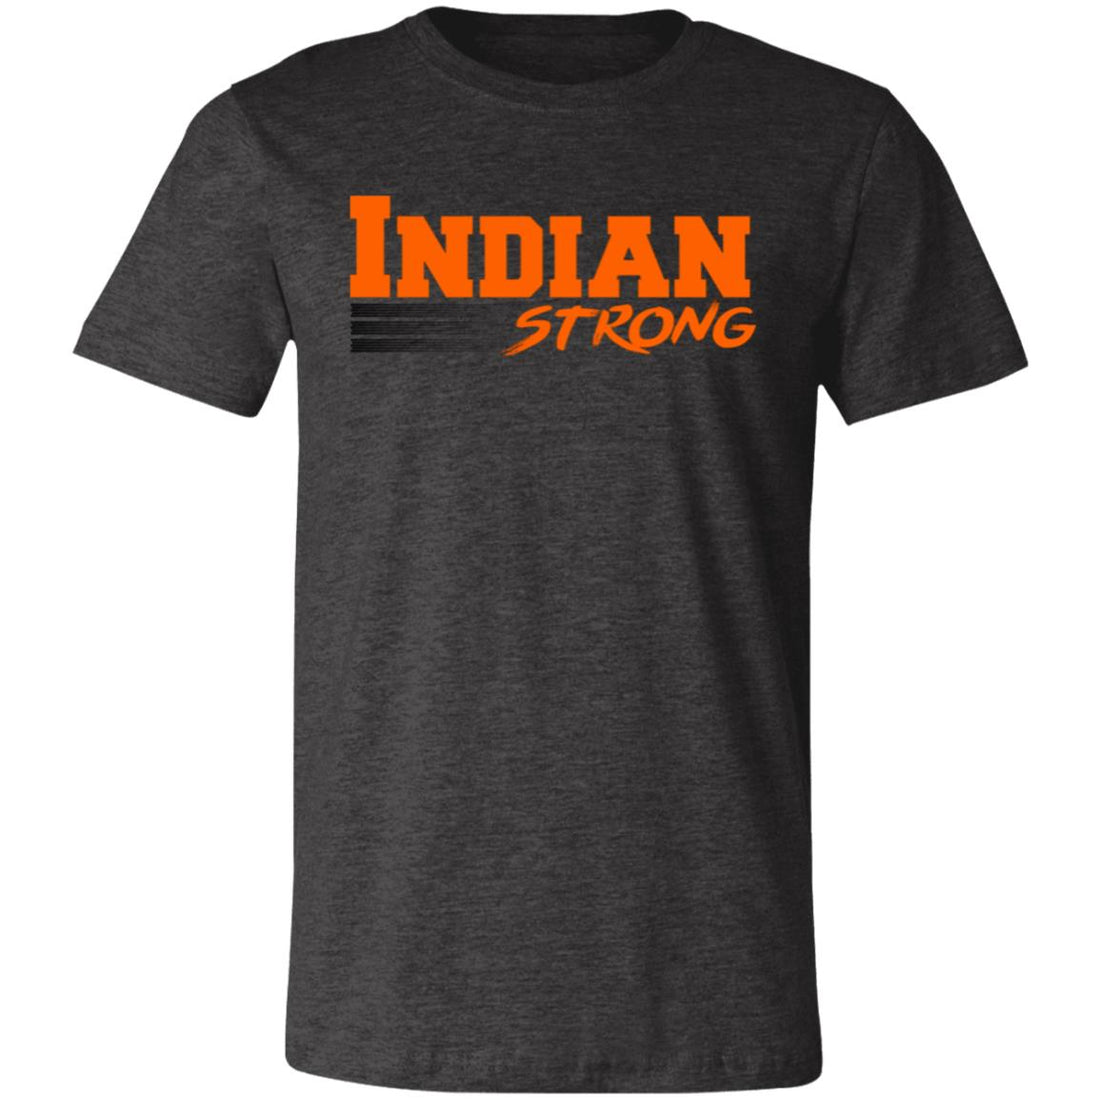 Indian Strong T-Shirt - T-Shirts - Positively Sassy - Indian Strong T-Shirt